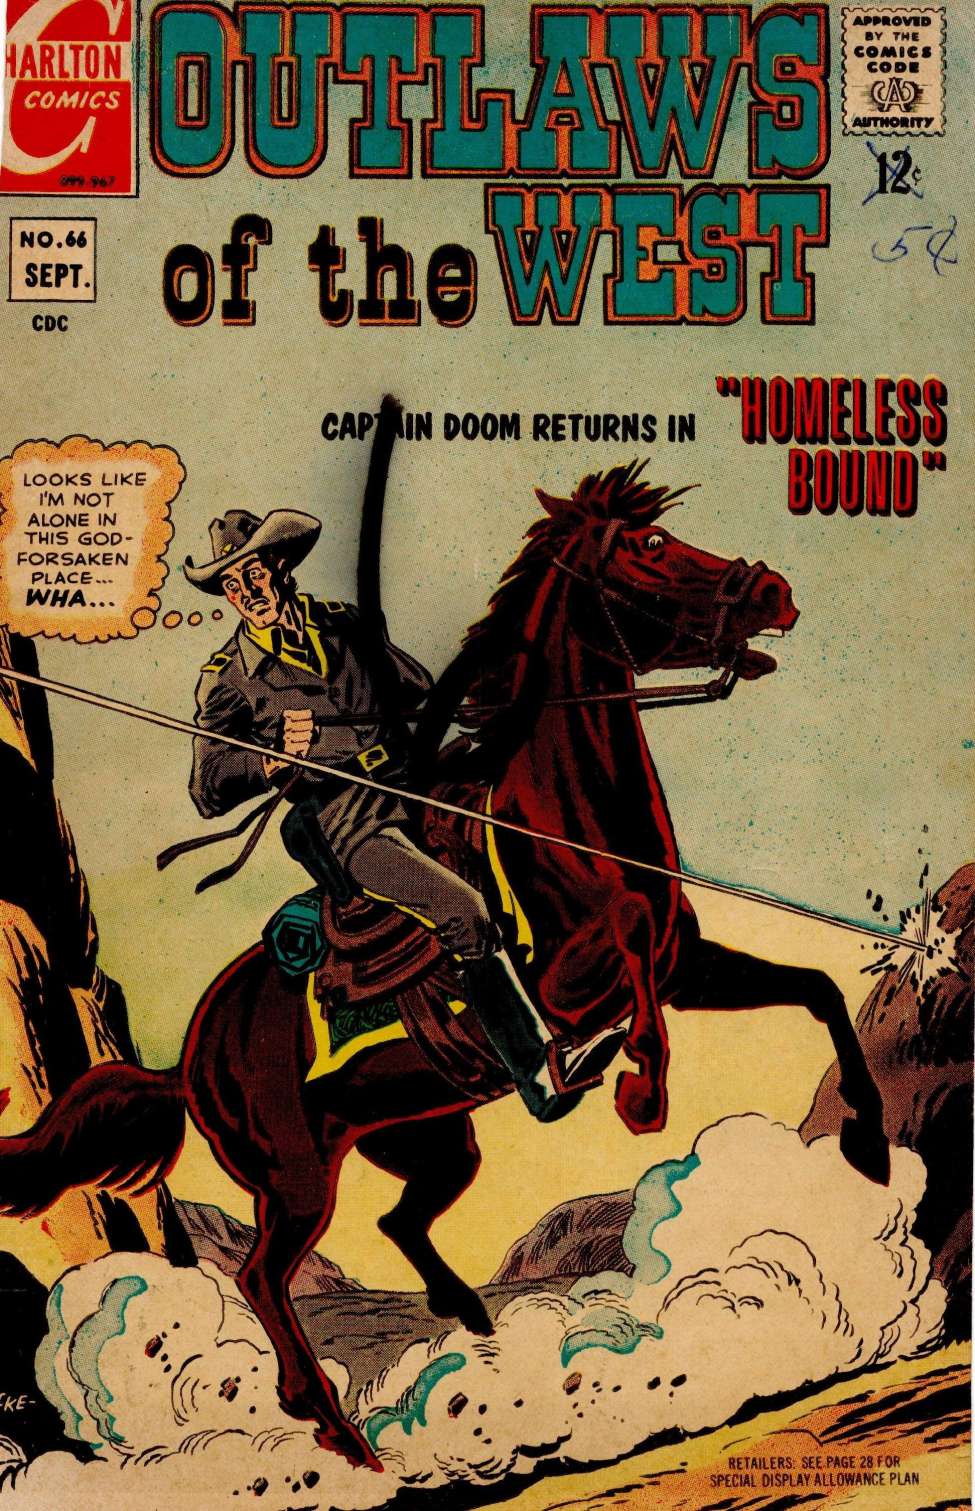 Book Cover For Outlaws of the West 66